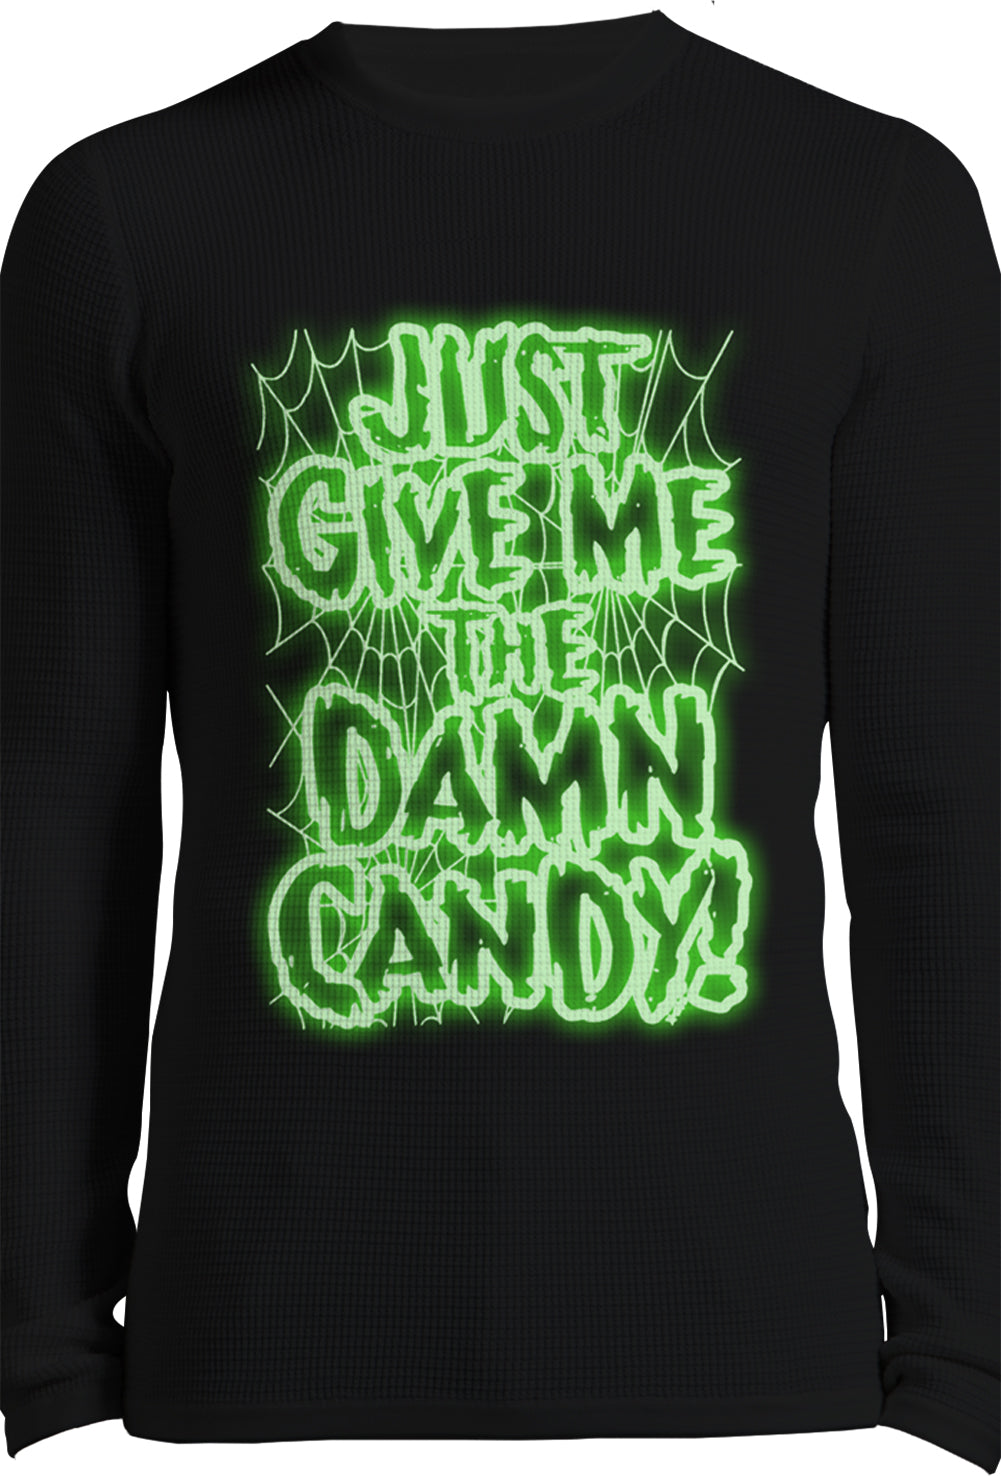 Just Give Me The Damn Candy Glow in the Dark Thermal Long Sleeve Shirt